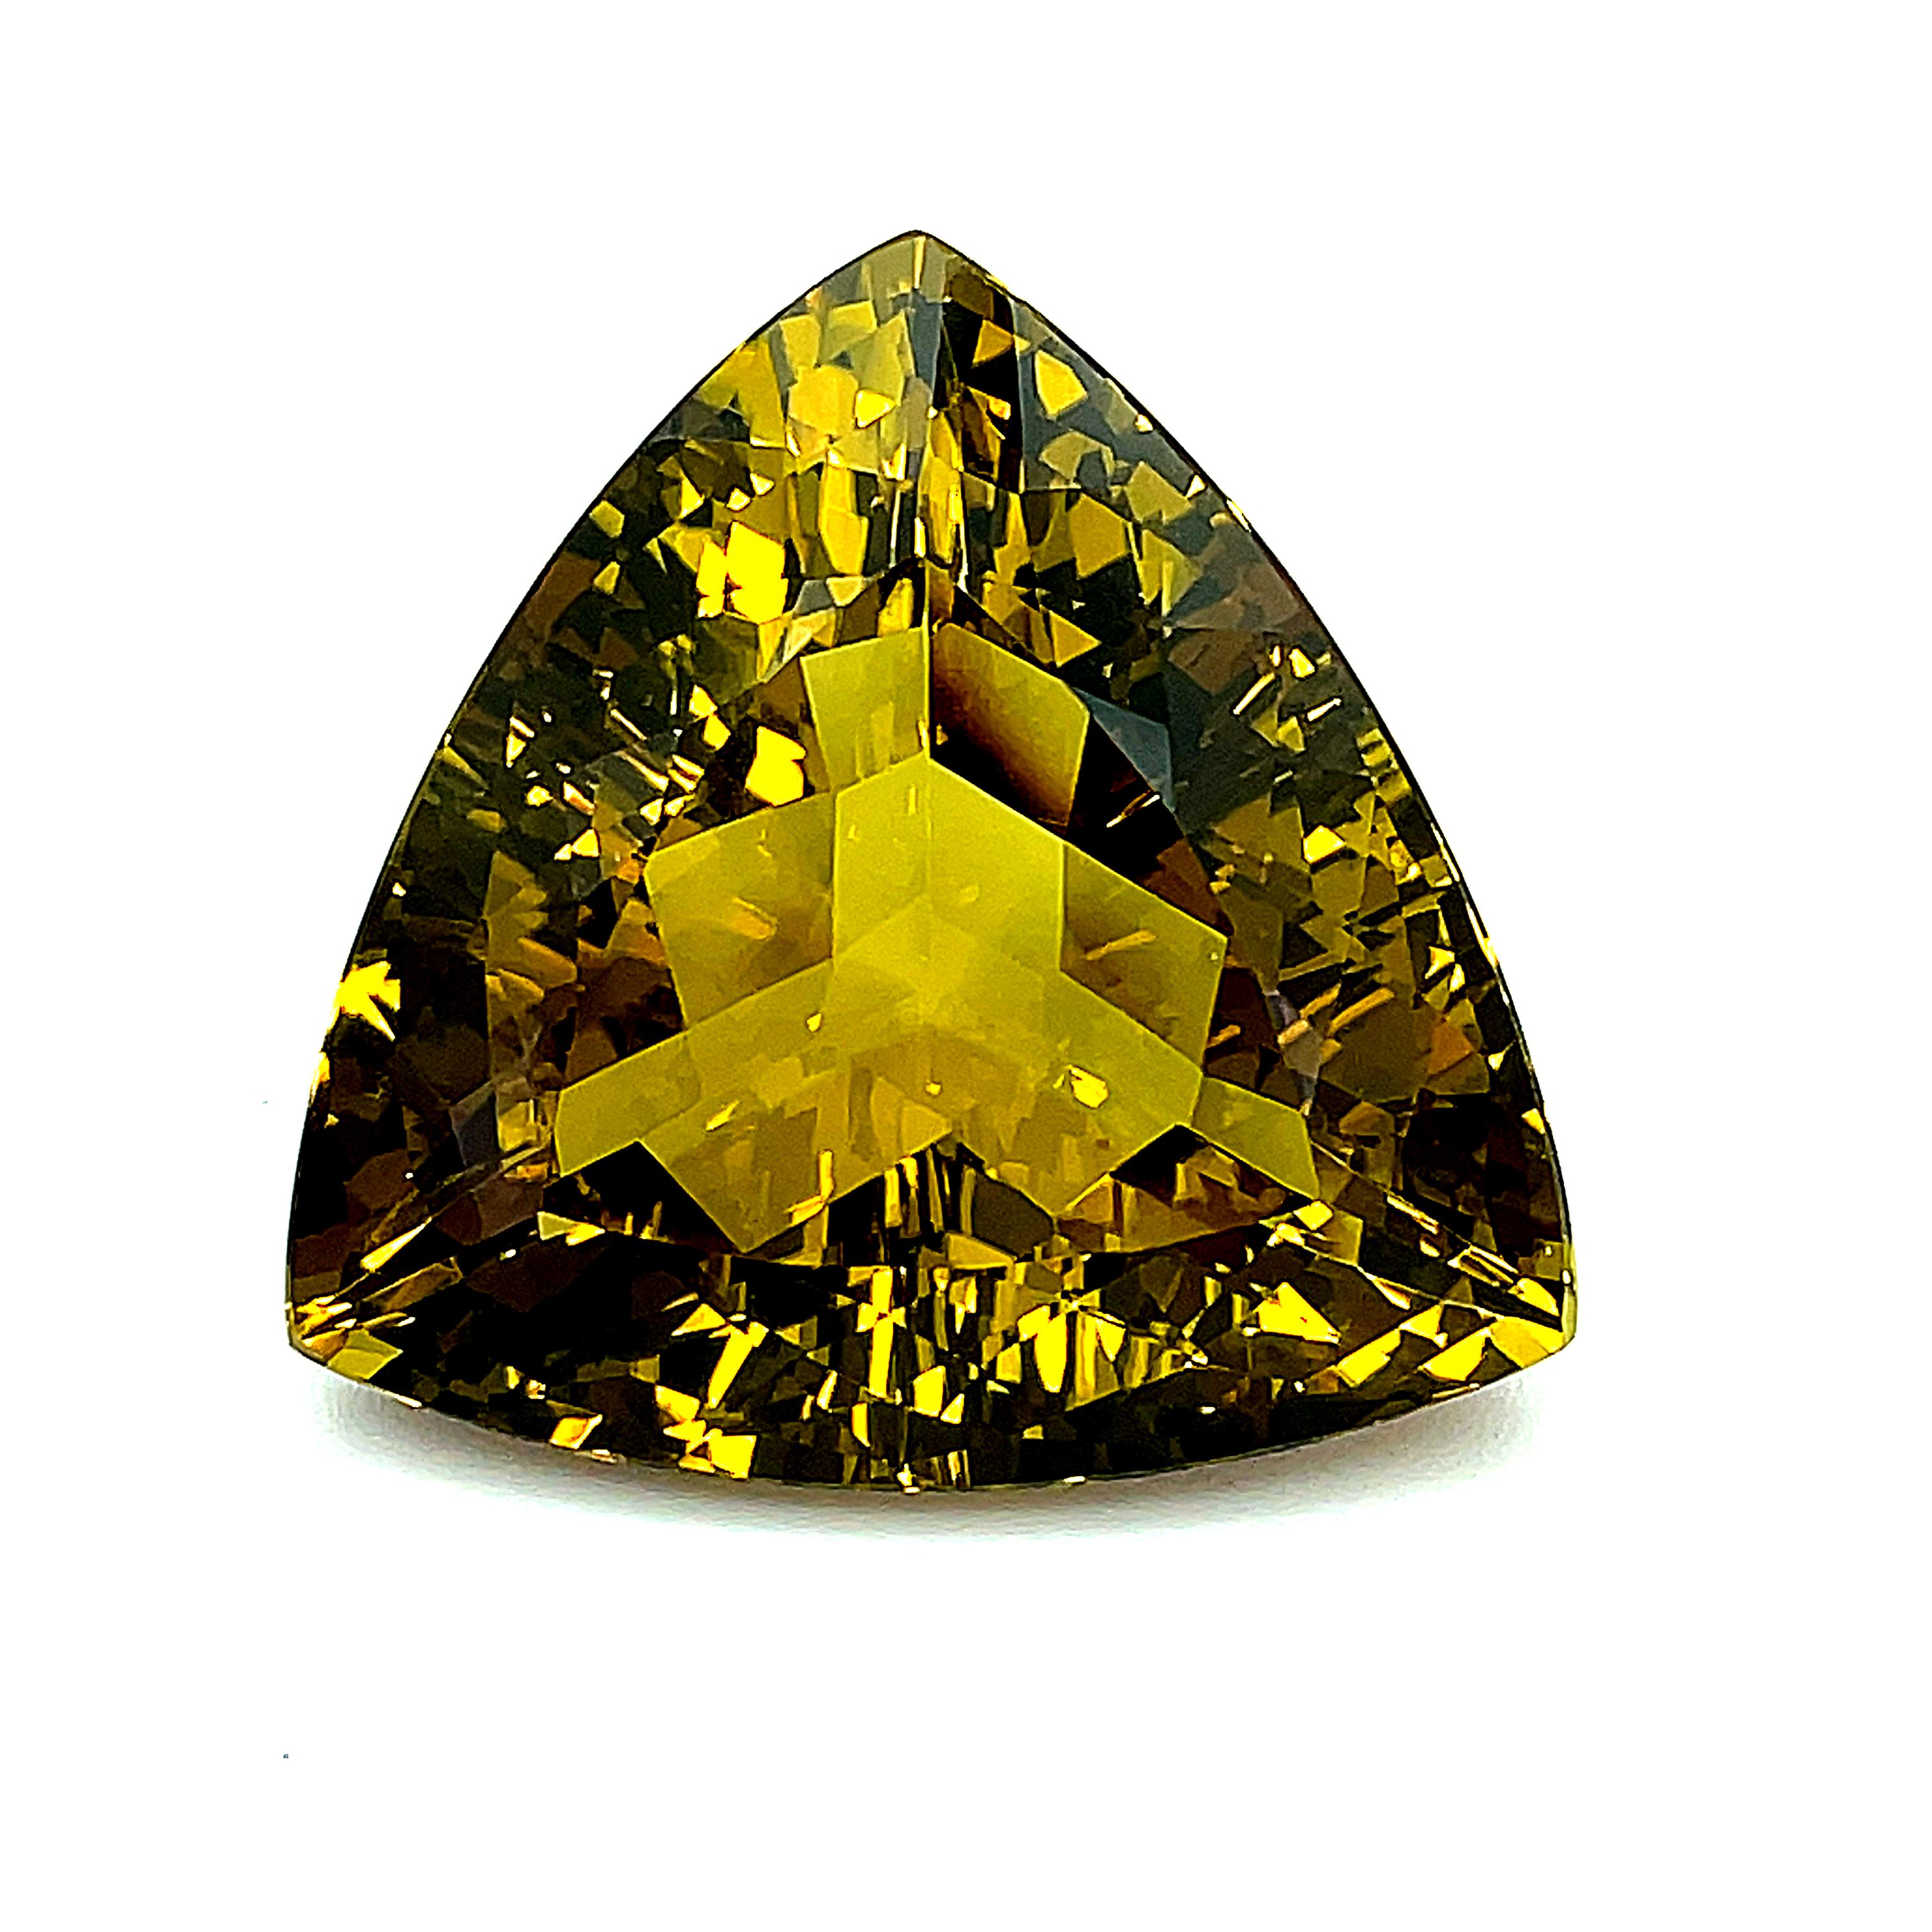 This beautifully faceted golden citron quartz weighs 212.14 carats and is stunningly brilliant! Evenly proportioned and full of life, this would make an impressive display piece whether on a desk or in a crystal cabinet! Golden lemon highlights